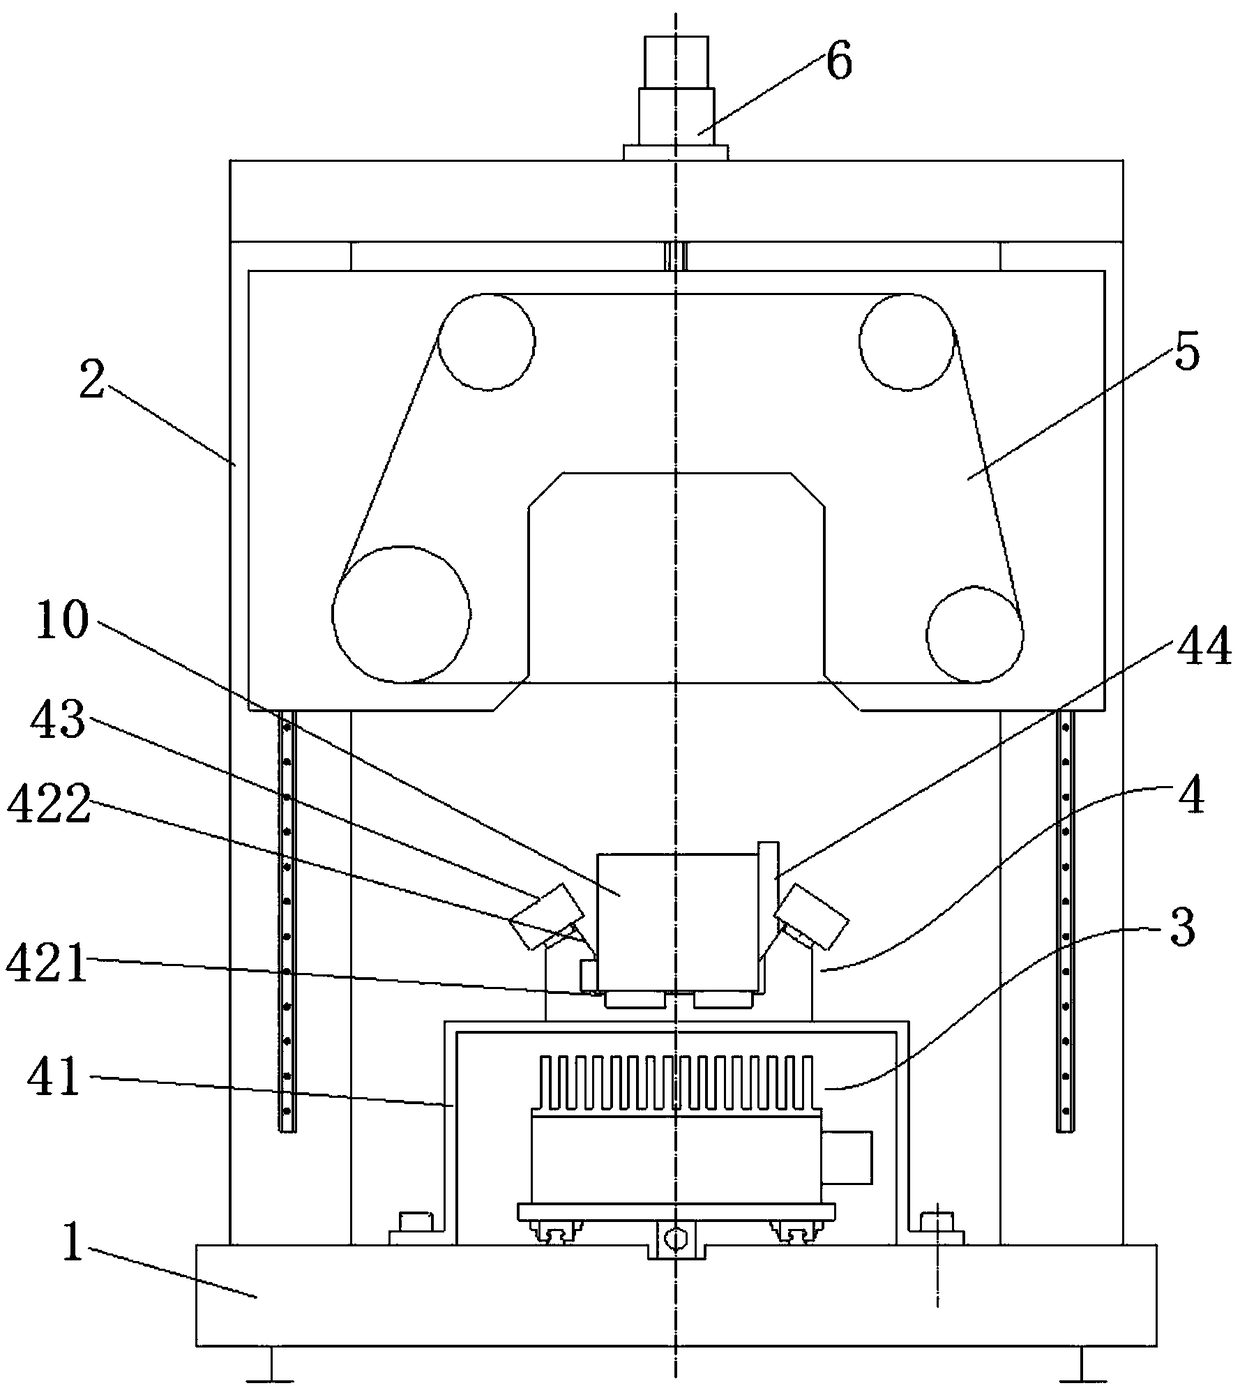 Silicon wafer processing device